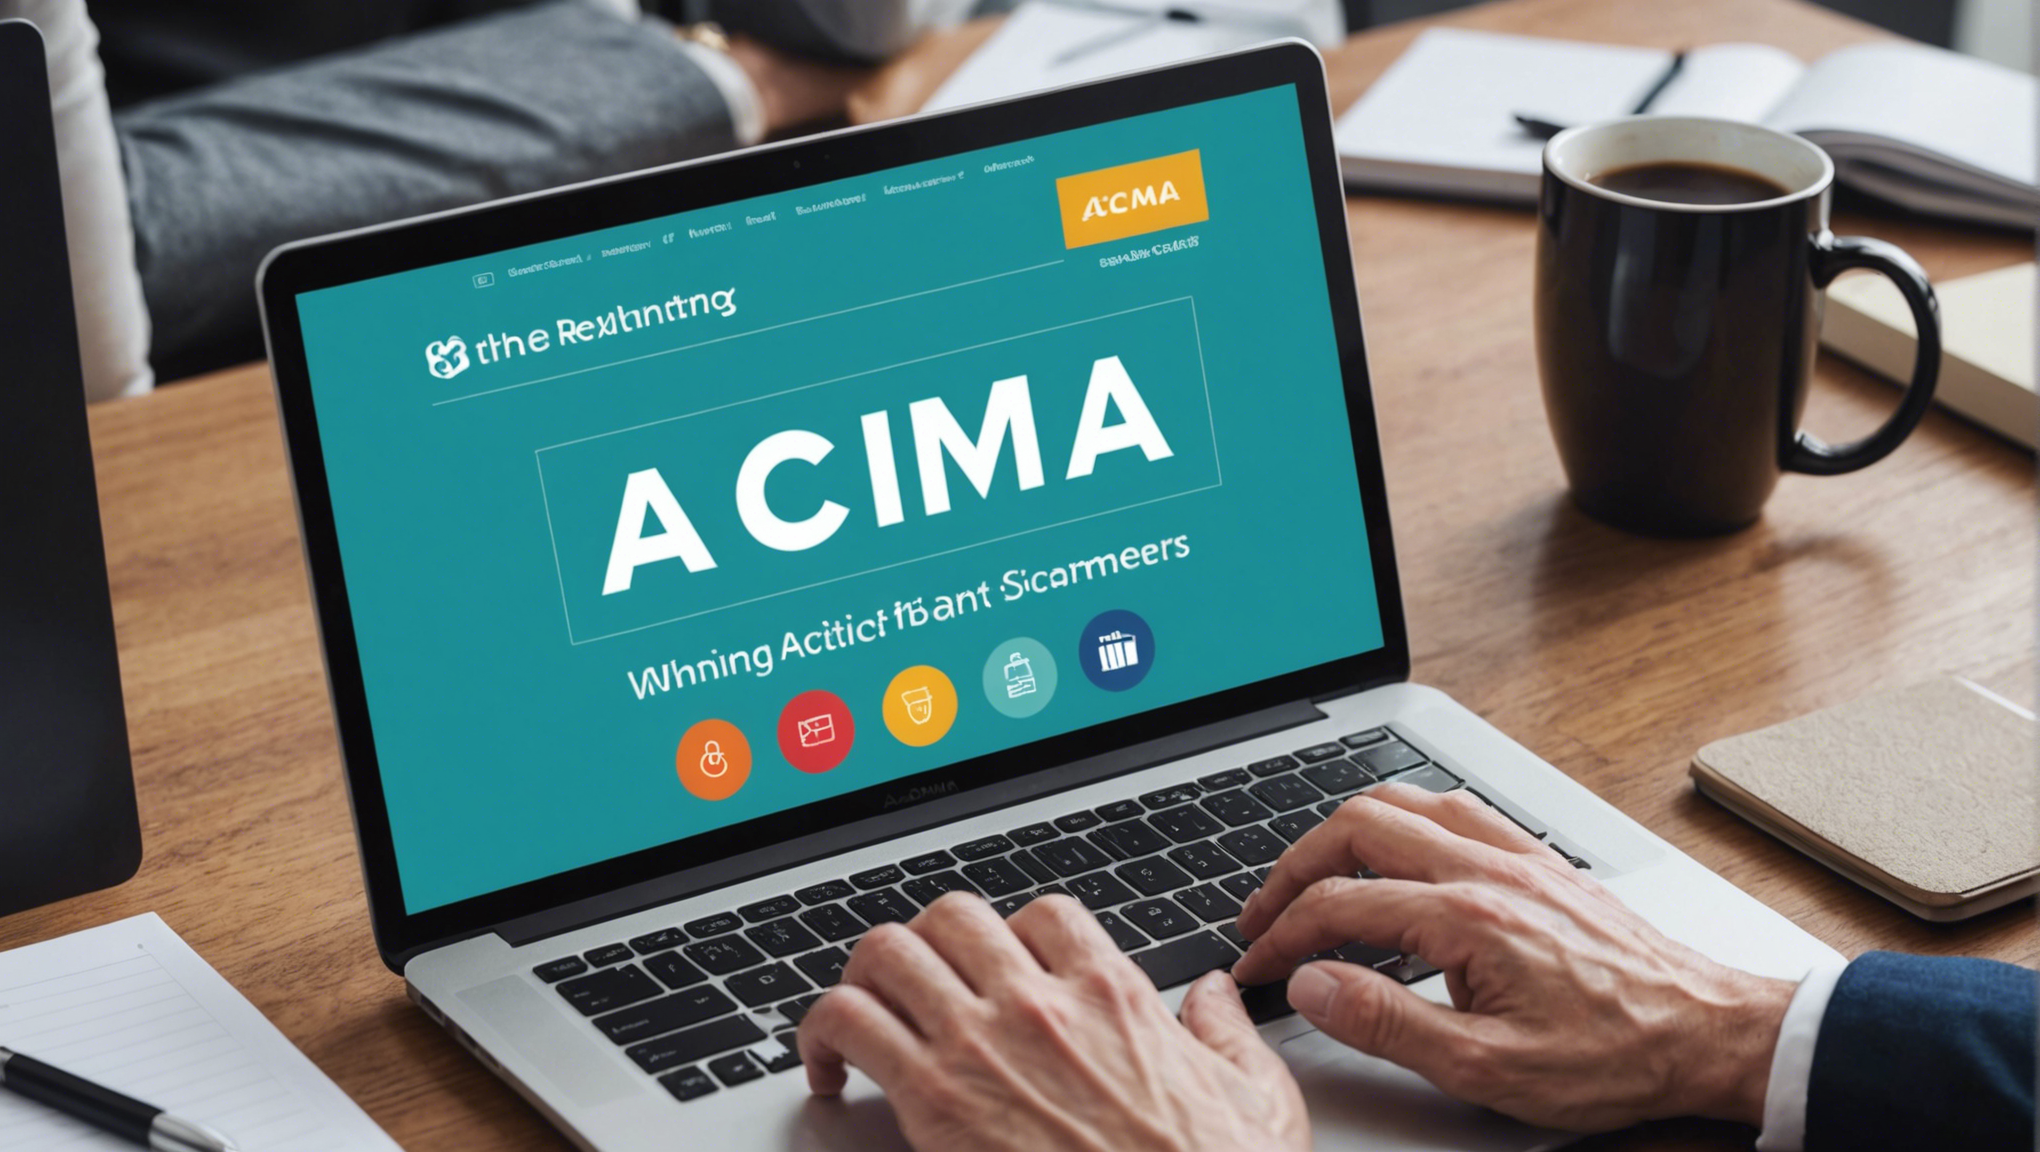 stay updated on the ongoing battle against scammers as the acma strives to win the fight. get the latest update on their progress.